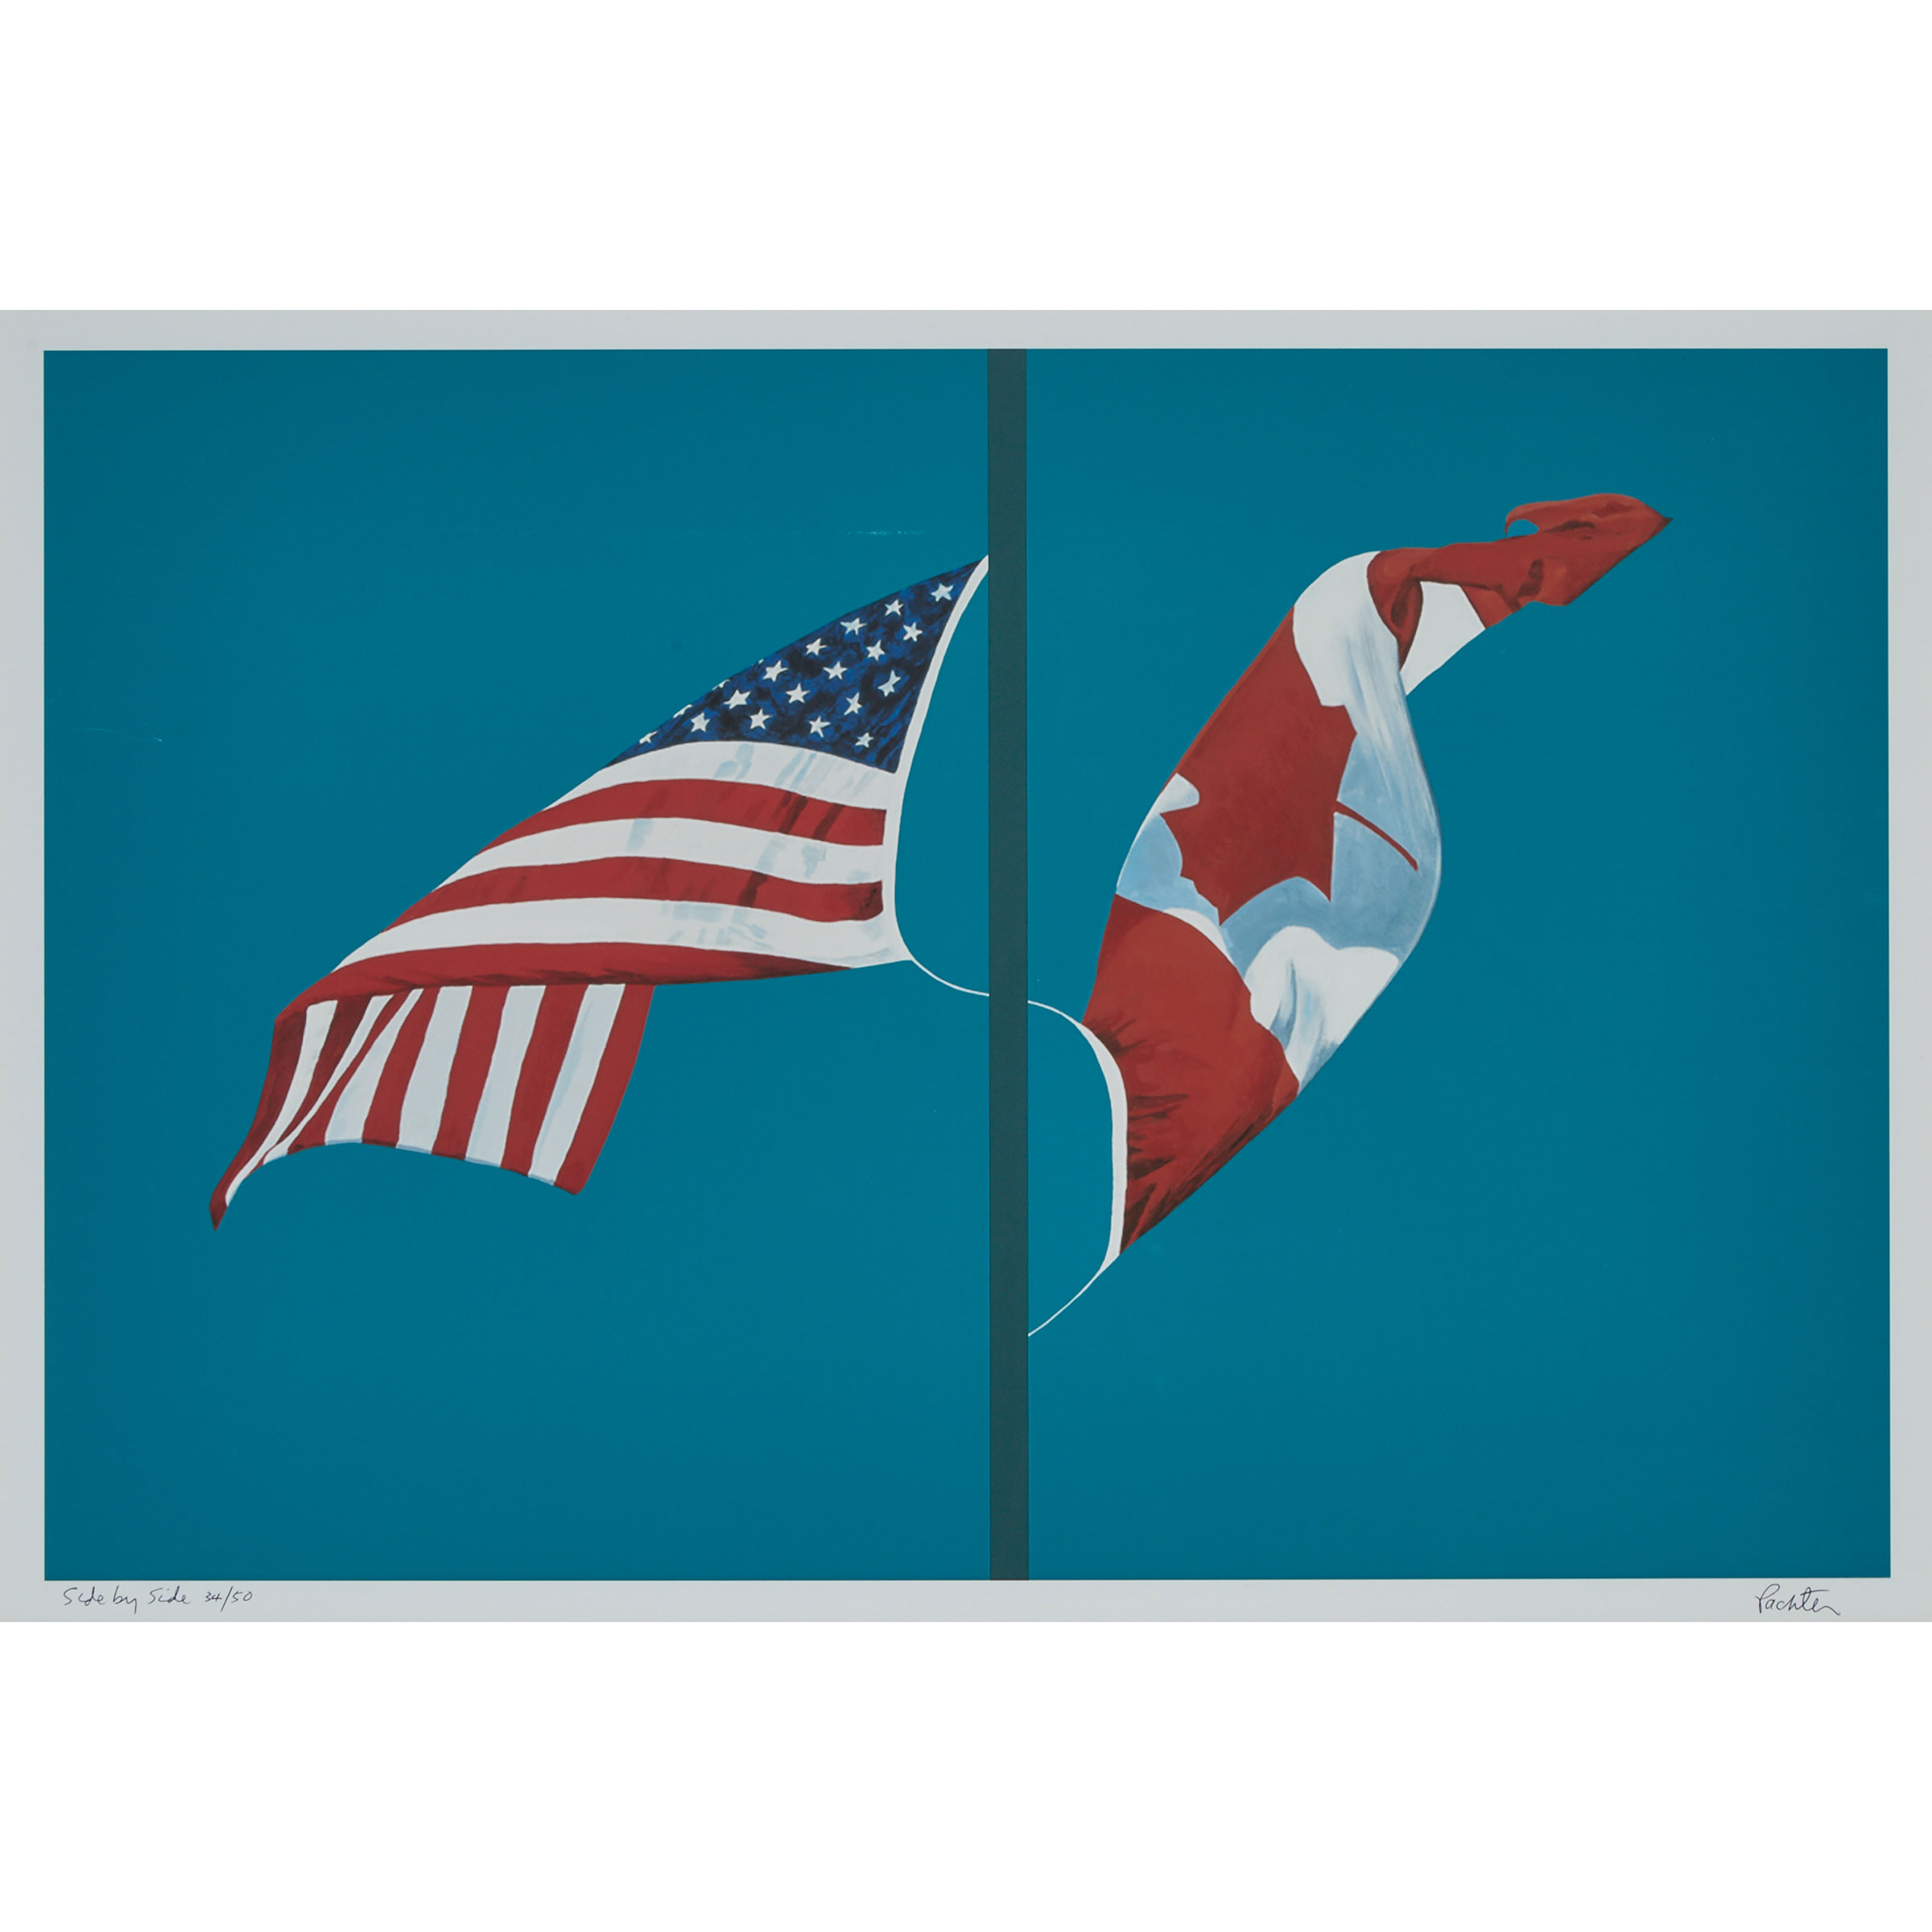 CHARLES PACHTER (1942-)